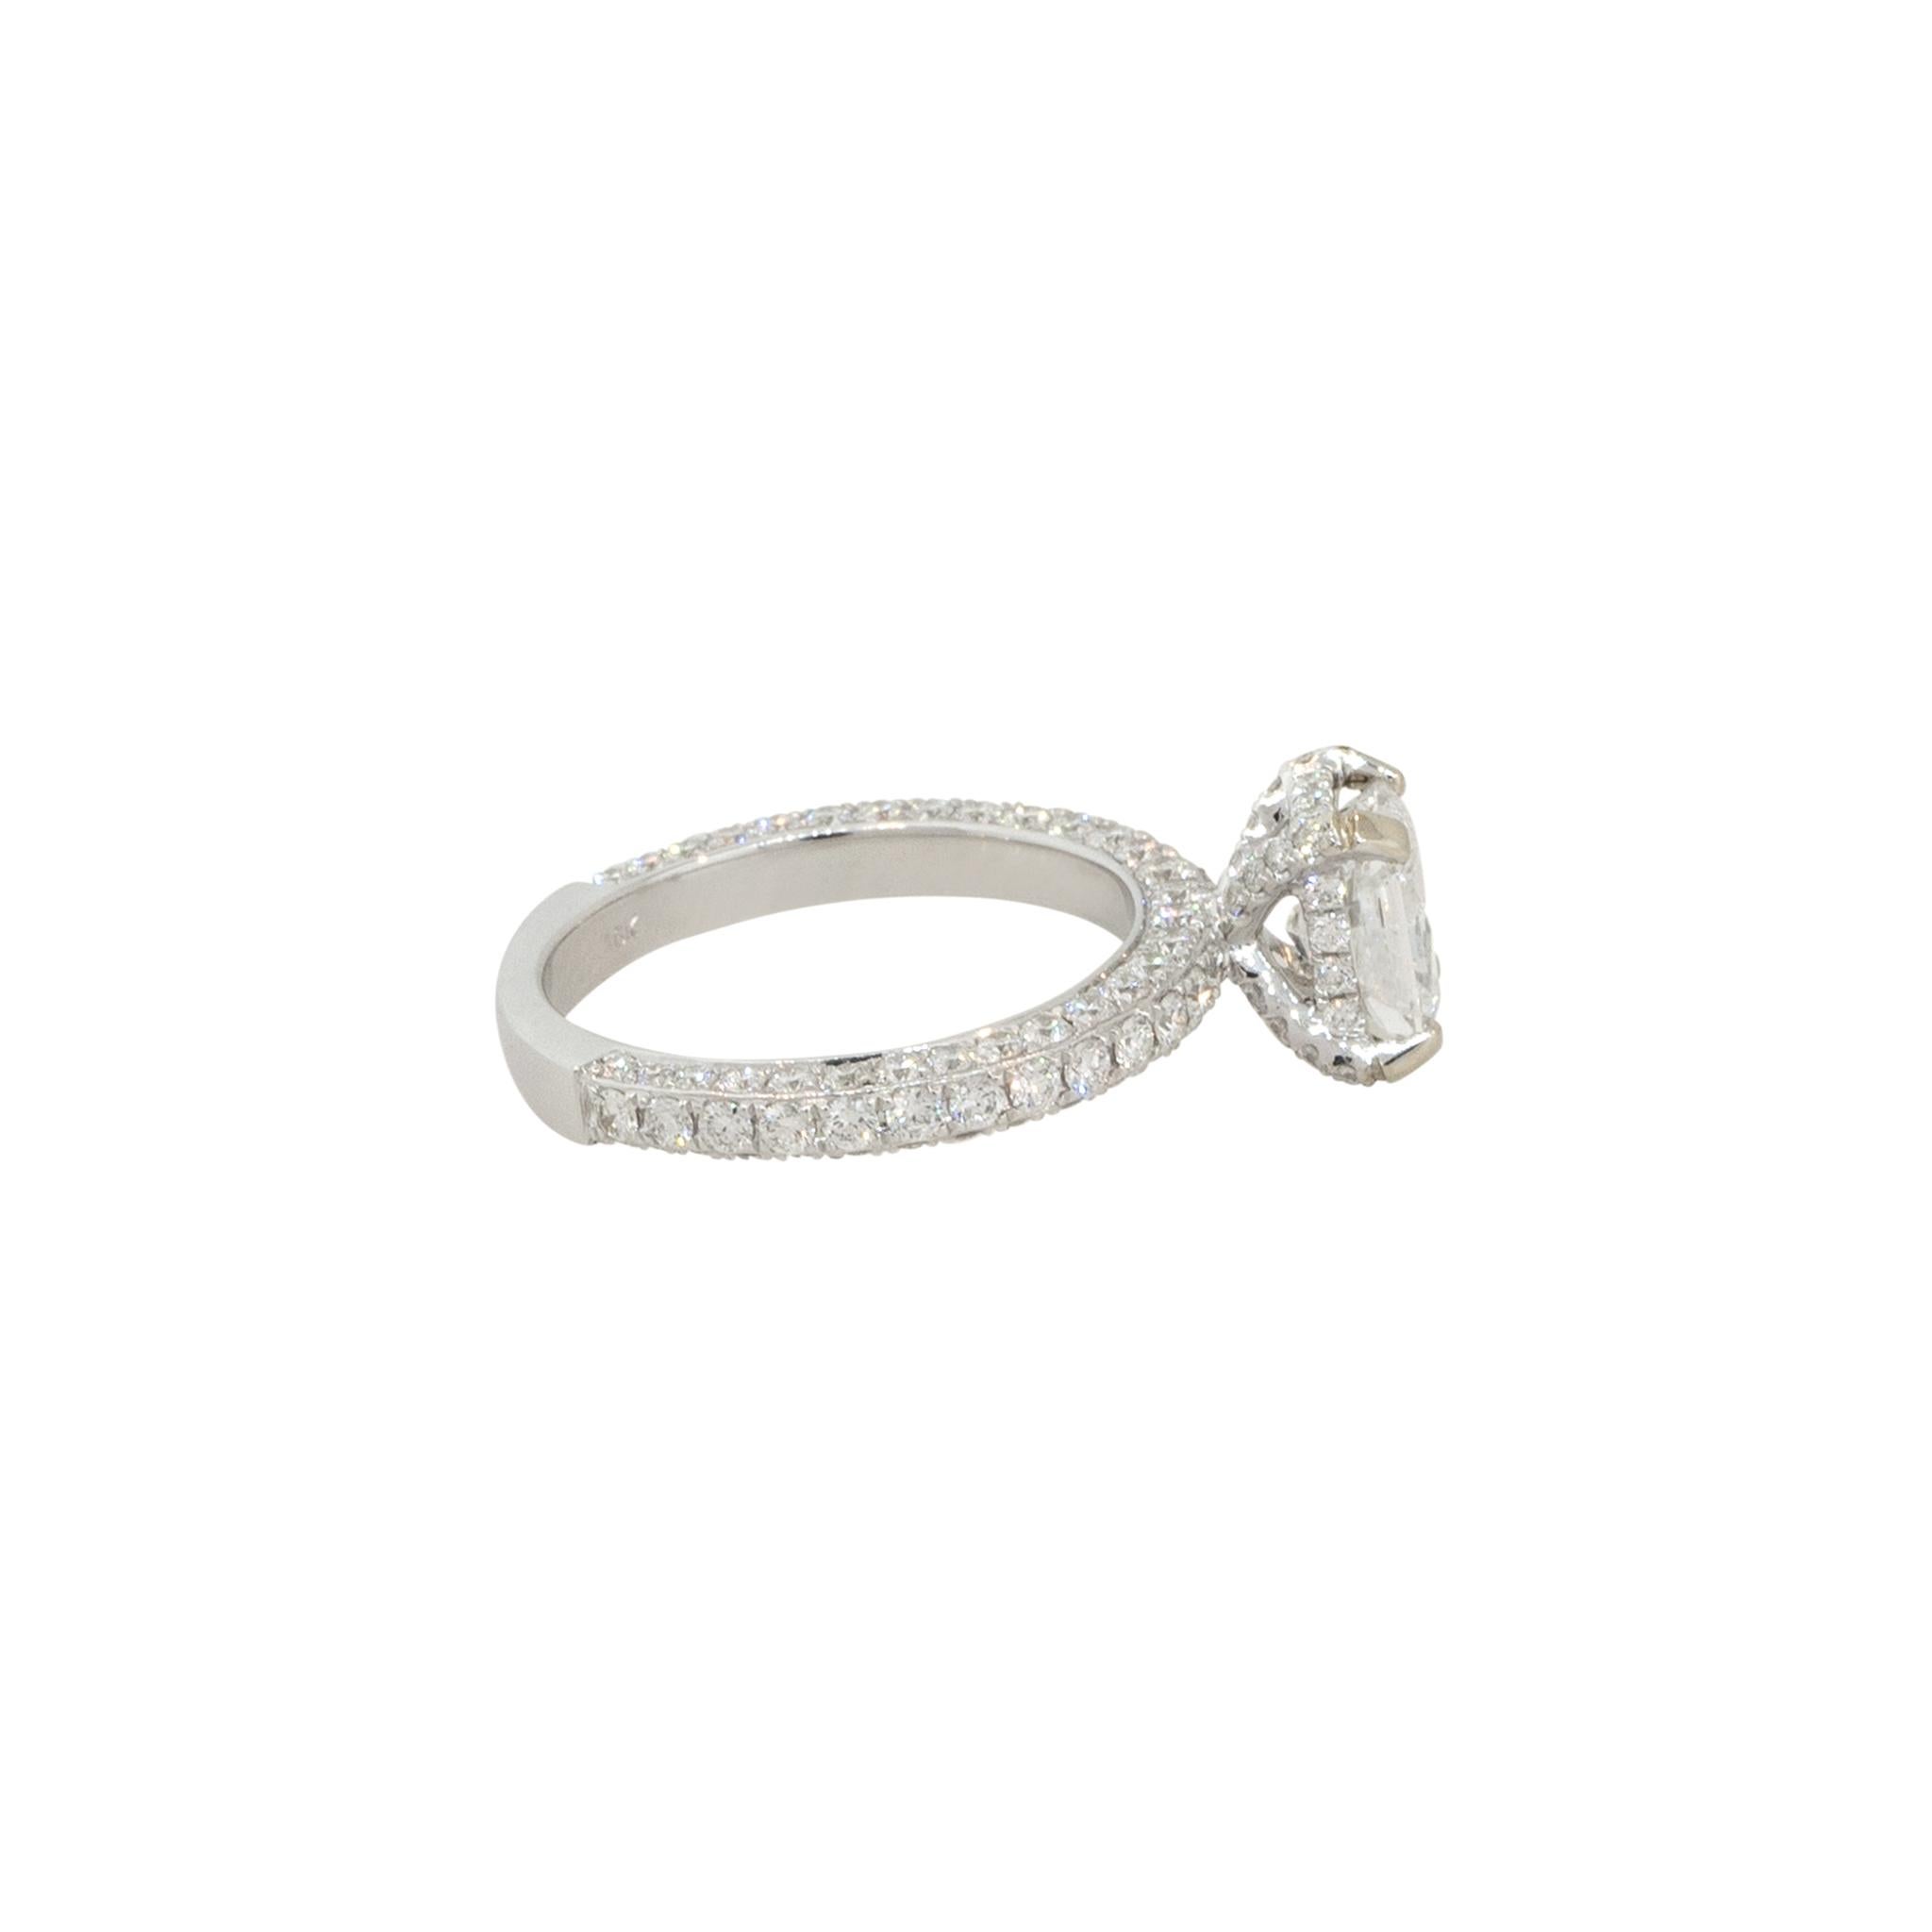 GIA Certified 18k White Gold 2.97ctw Radiant Cut Diamond Engagement Ring

Raymond Lee Jewelers in Boca Raton -- South Florida’s destination for diamonds, fine jewelry, antique jewelry, estate pieces, and vintage jewels.

Style: Women's 4 Prong